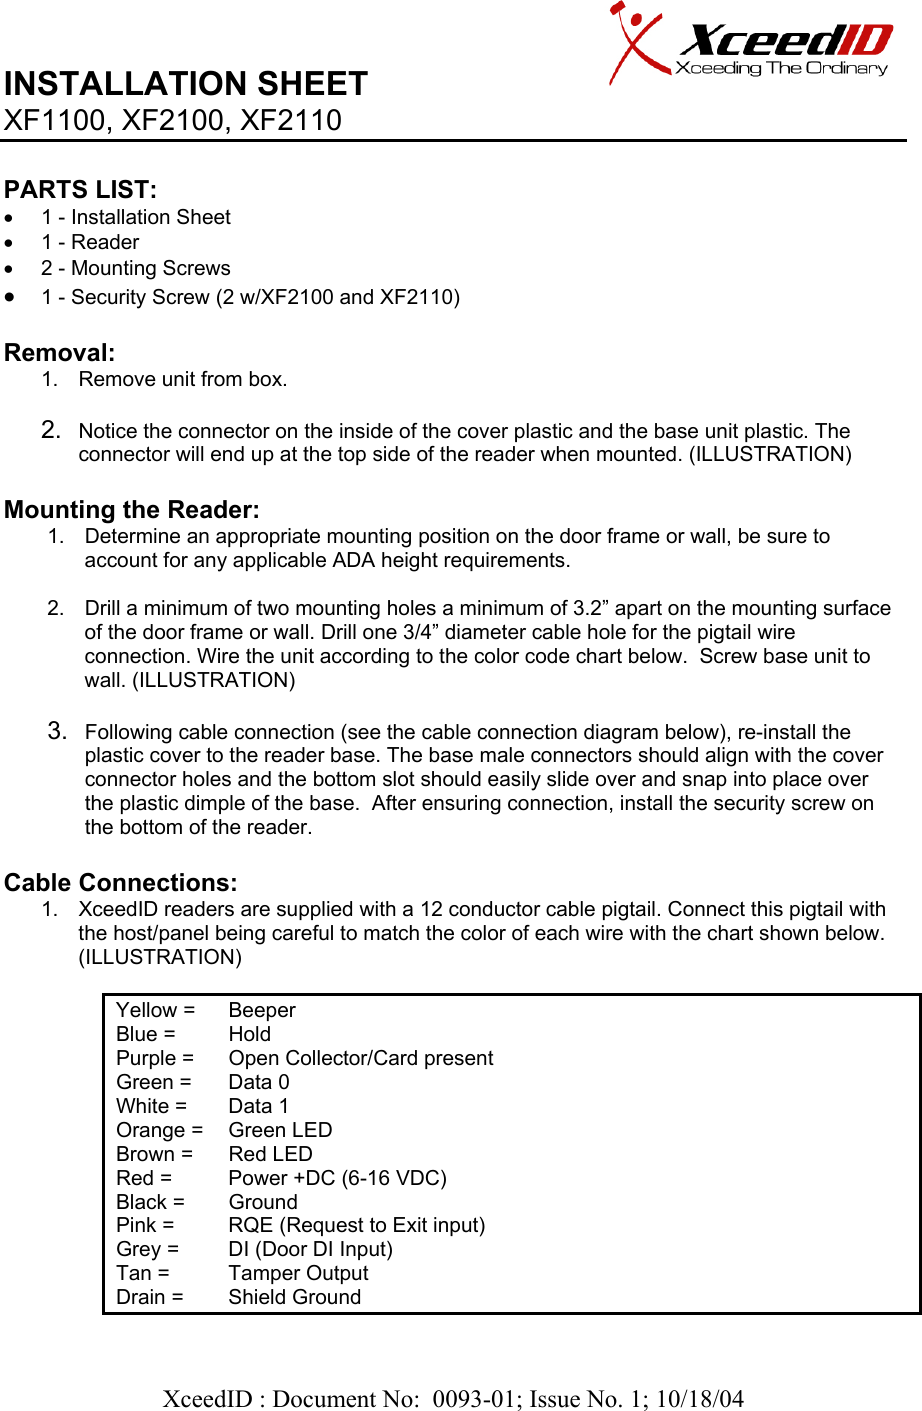   XceedID : Document No:  0093-01; Issue No. 1; 10/18/04   INSTALLATION SHEET                     XF1100, XF2100, XF2110     PARTS LIST:      •  1 - Installation Sheet •  1 - Reader •  2 - Mounting Screws • 1 - Security Screw (2 w/XF2100 and XF2110)  Removal:  1.  Remove unit from box.  2.  Notice the connector on the inside of the cover plastic and the base unit plastic. The connector will end up at the top side of the reader when mounted. (ILLUSTRATION)  Mounting the Reader: 1.  Determine an appropriate mounting position on the door frame or wall, be sure to account for any applicable ADA height requirements.  2.  Drill a minimum of two mounting holes a minimum of 3.2” apart on the mounting surface of the door frame or wall. Drill one 3/4” diameter cable hole for the pigtail wire connection. Wire the unit according to the color code chart below.  Screw base unit to wall. (ILLUSTRATION)  3.  Following cable connection (see the cable connection diagram below), re-install the plastic cover to the reader base. The base male connectors should align with the cover connector holes and the bottom slot should easily slide over and snap into place over the plastic dimple of the base.  After ensuring connection, install the security screw on the bottom of the reader.  Cable Connections: 1.  XceedID readers are supplied with a 12 conductor cable pigtail. Connect this pigtail with the host/panel being careful to match the color of each wire with the chart shown below. (ILLUSTRATION)              Yellow =   Beeper Blue =   Hold Purple =   Open Collector/Card present  Green =   Data 0 White =   Data 1 Orange =   Green LED Brown =   Red LED Red =   Power +DC (6-16 VDC) Black =   Ground Pink =   RQE (Request to Exit input) Grey =   DI (Door DI Input) Tan =   Tamper Output Drain =   Shield Ground  